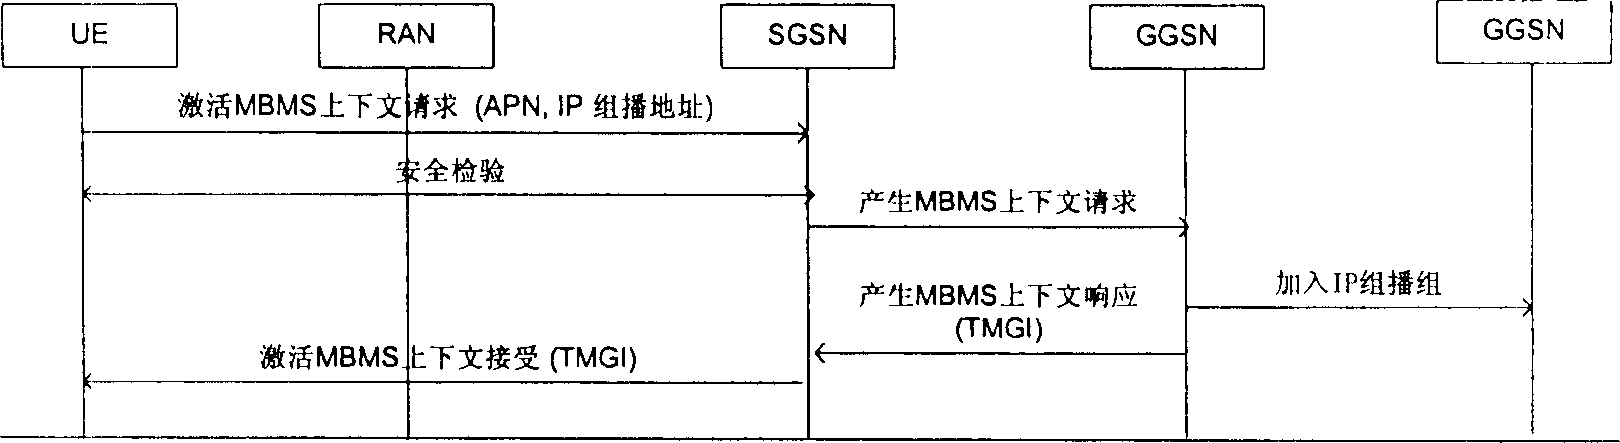 Production of temporary mobile group designation and distribution method